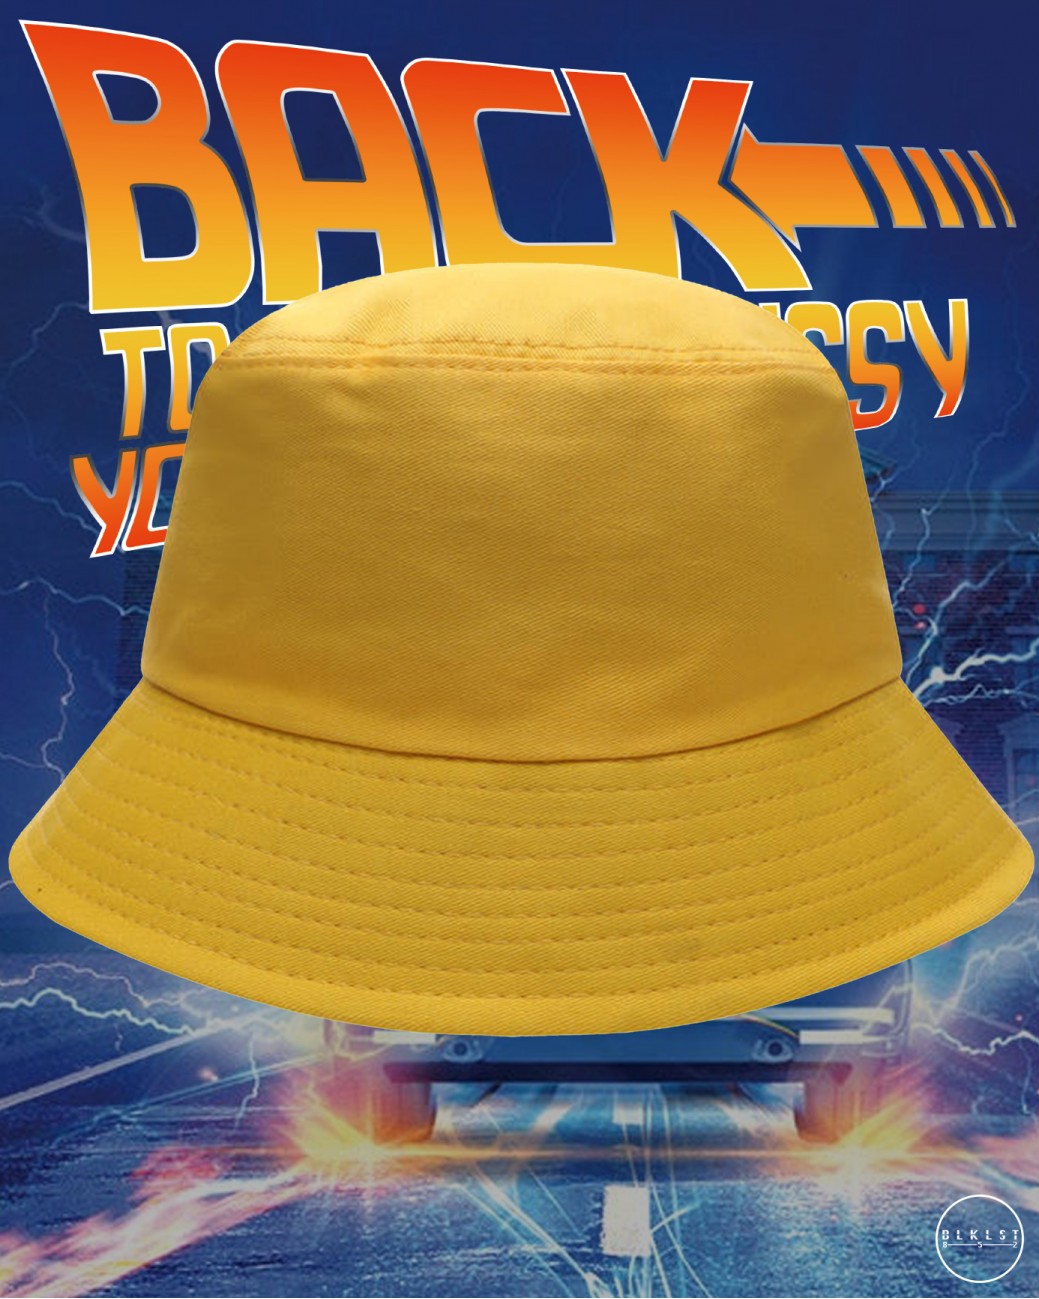 BACK TO YOUR MUMS PUSSY BUCKETHAT